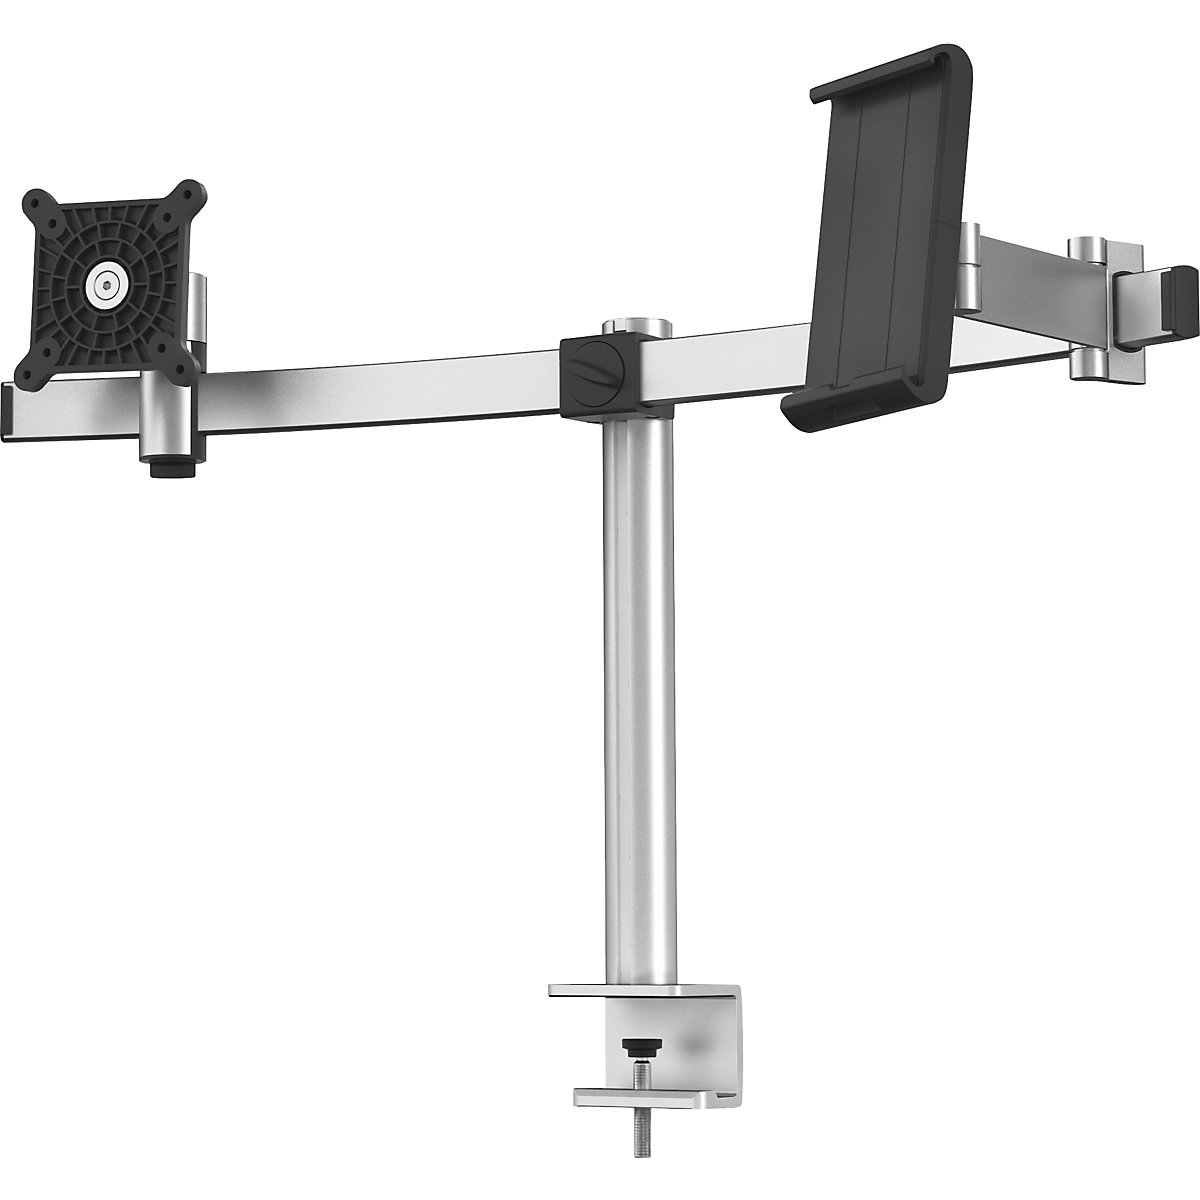 Monitor holder for 1 monitor and 1 tablet – DURABLE, HxWxD 445 x 780 x 190 mm, with table clamp